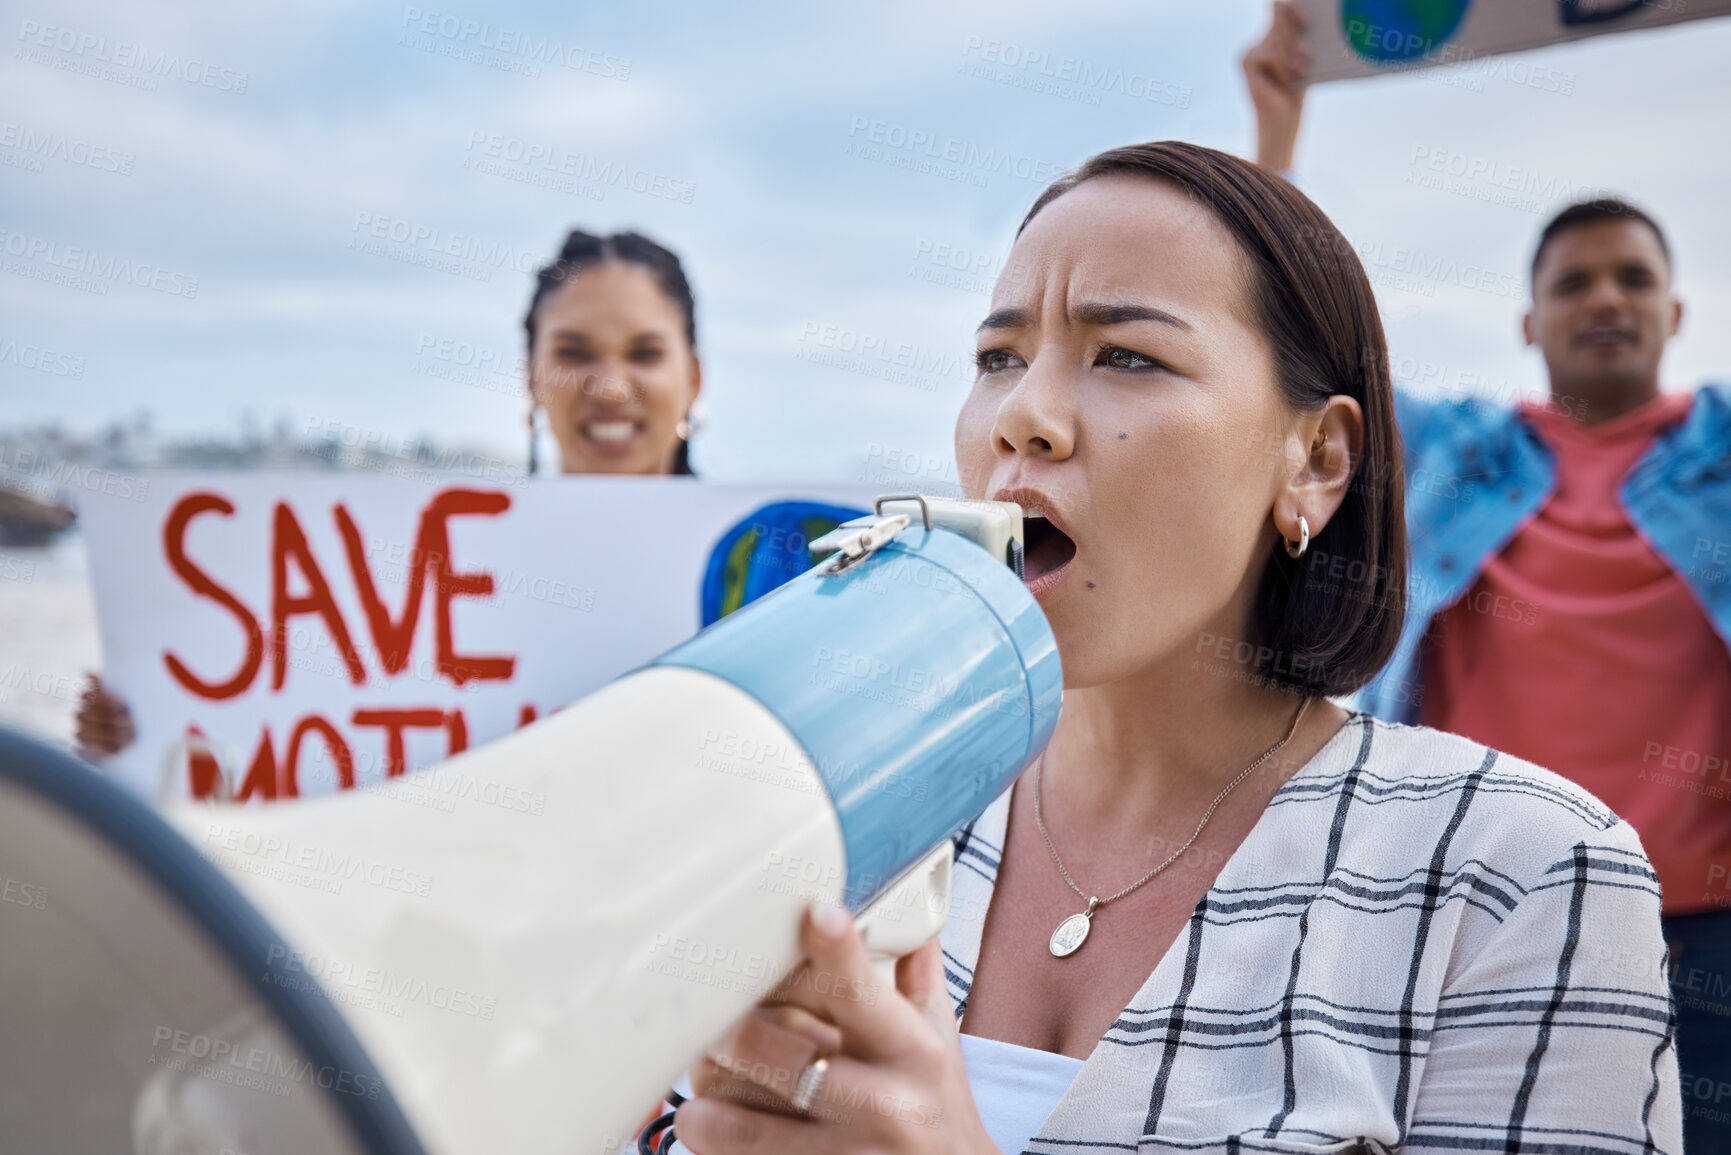 Buy stock photo Climate change, megaphone and Asian woman protest with crowd protesting for environment and global warming. Save the earth, group activism and female shouting on bullhorn to stop planet pollution.